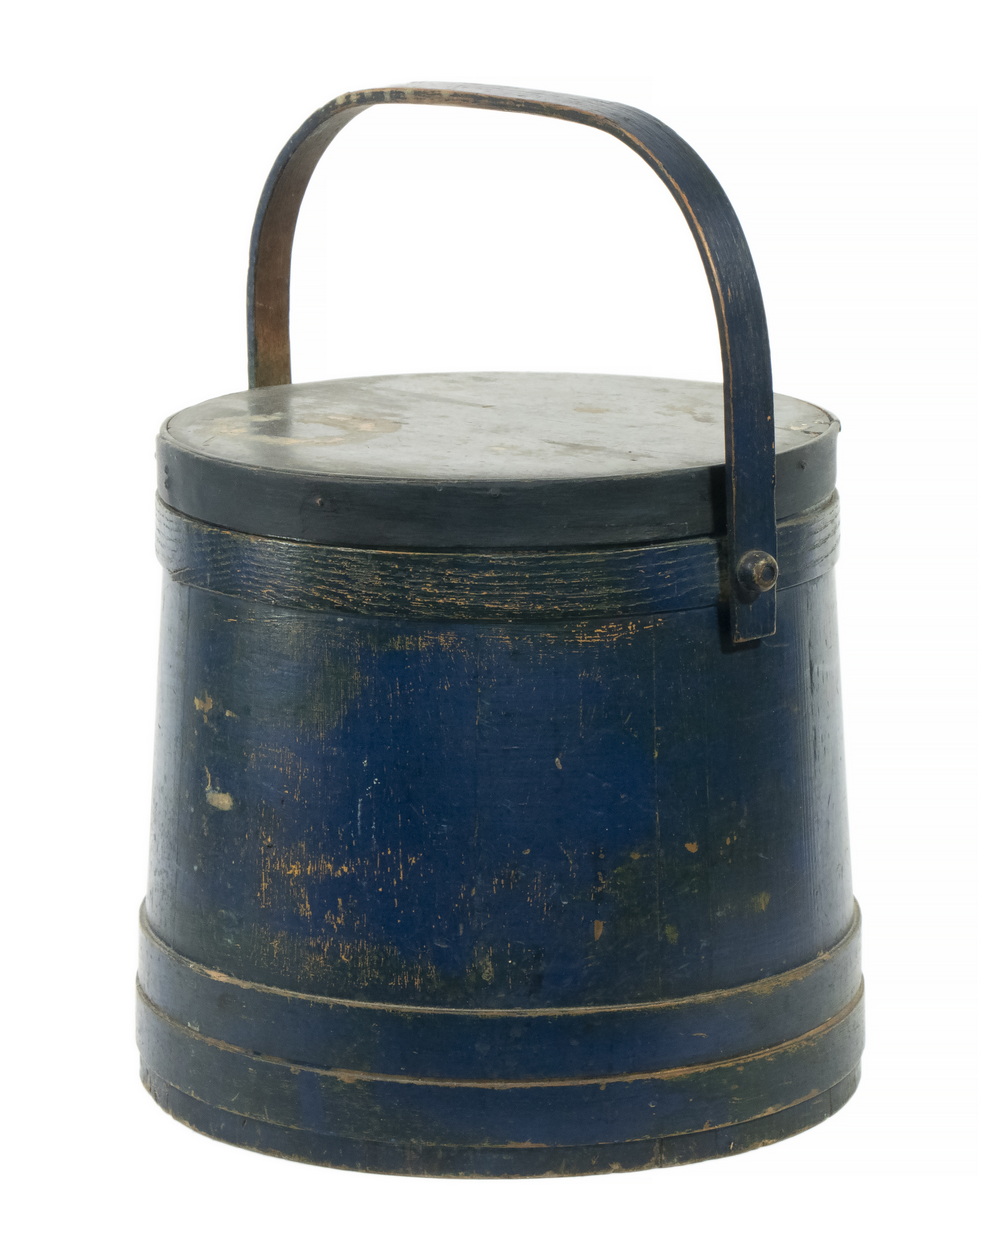 19TH C. BLUE PAINTED WOODEN FIRKIN